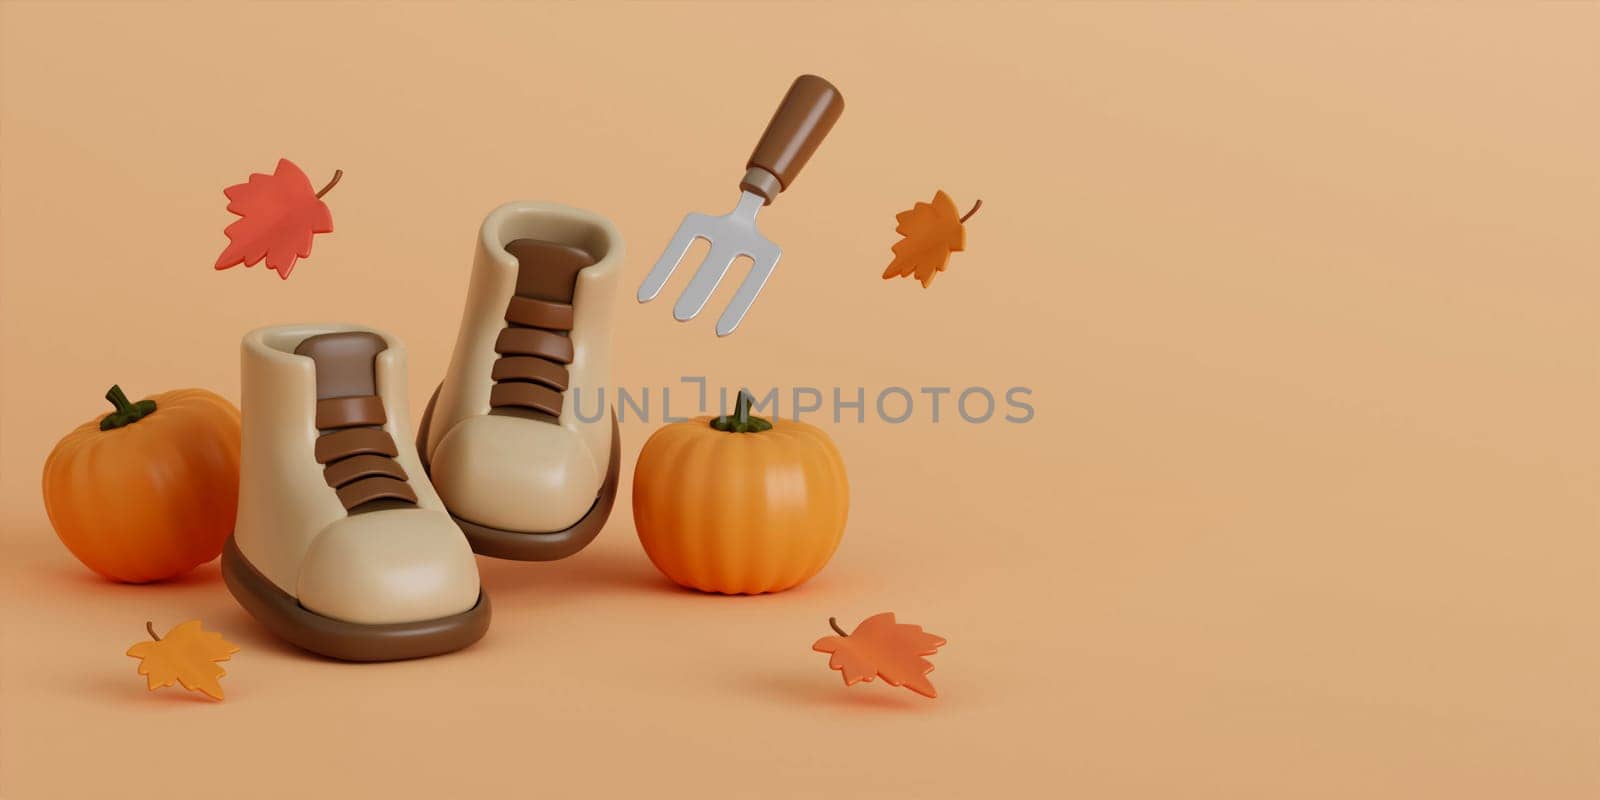 Hello Autumn with boot, leaves, pumpkins, and Shoveling fork background. 3d Fall leaves for the design of Fall banners, posters, advertisements, cards, sales. 3d render illustration..